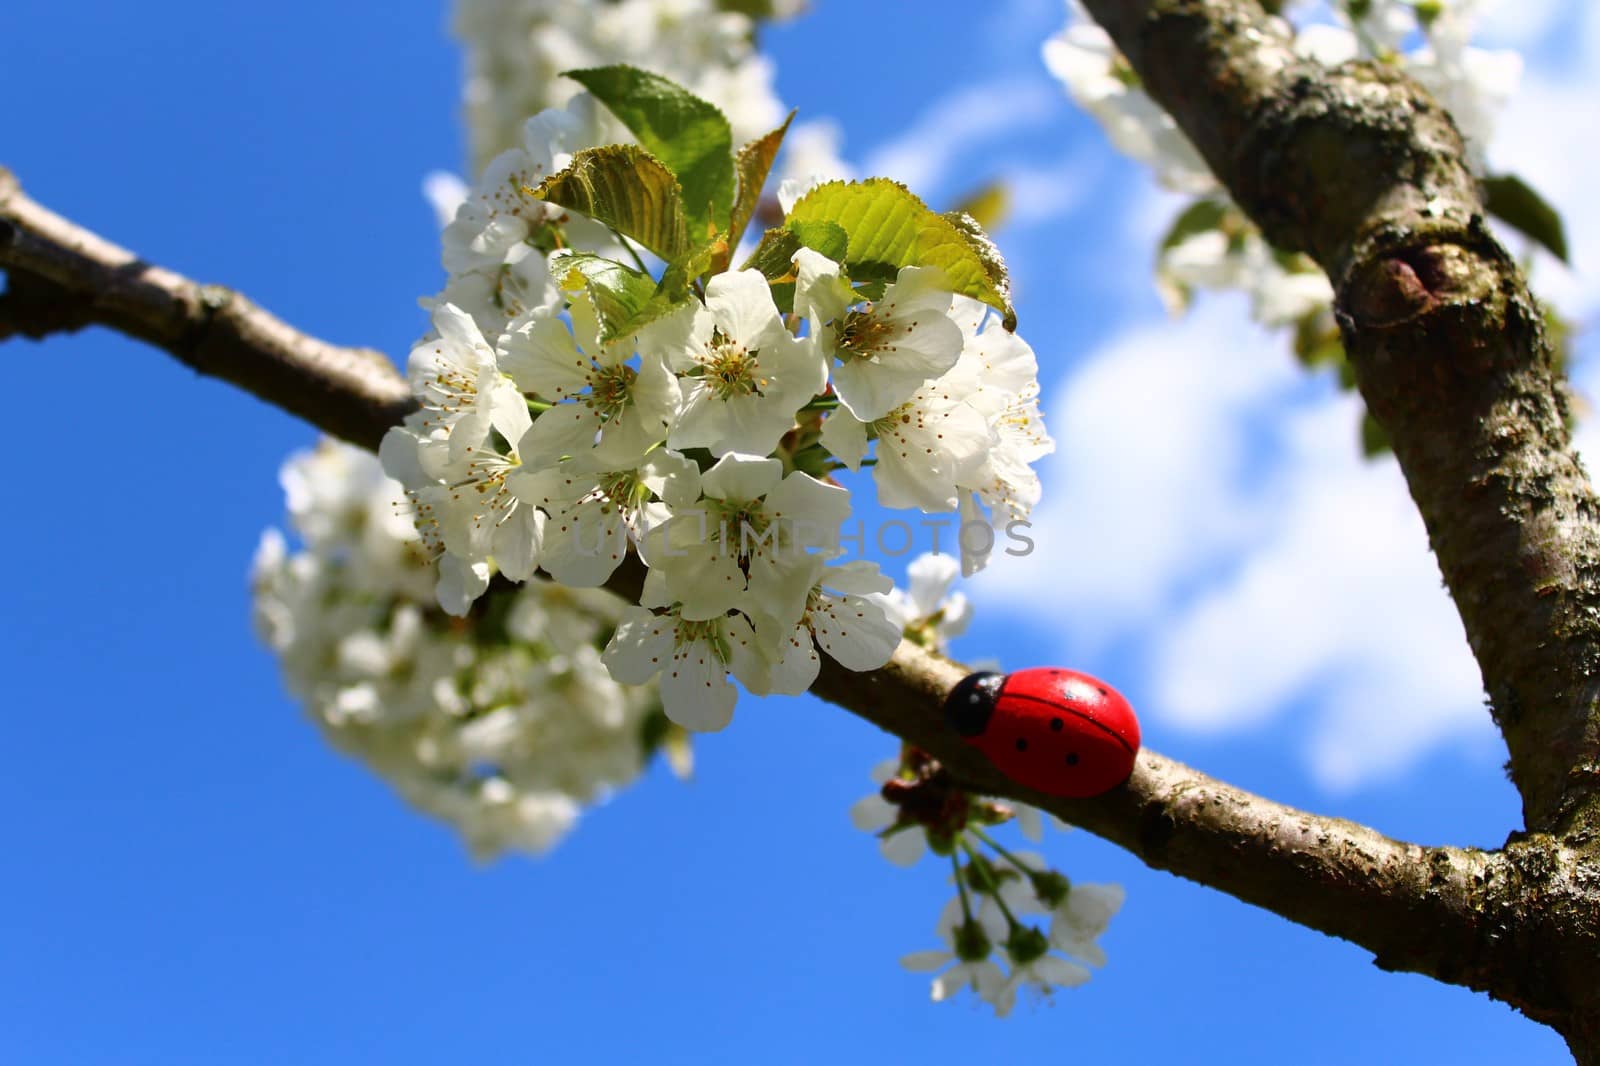 The pictureshows a ladybug on a blooming cherry tree.